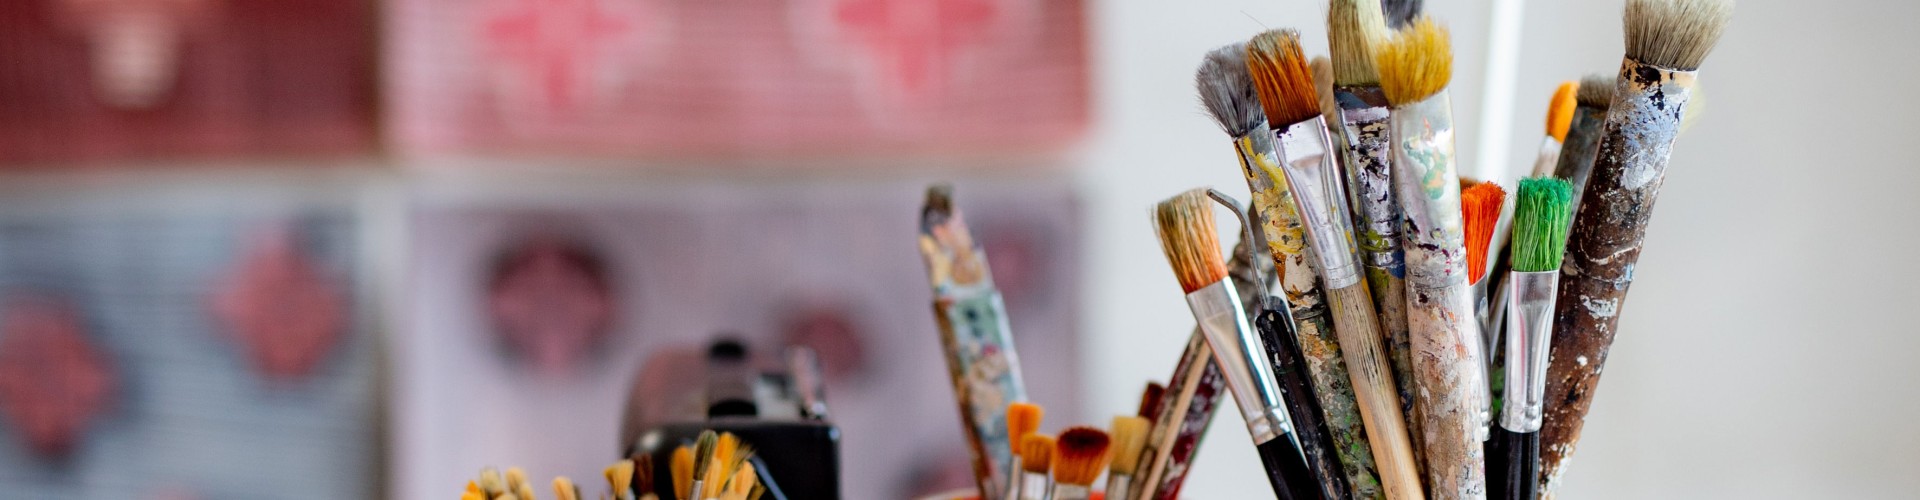 Art paintbrushes in a studio